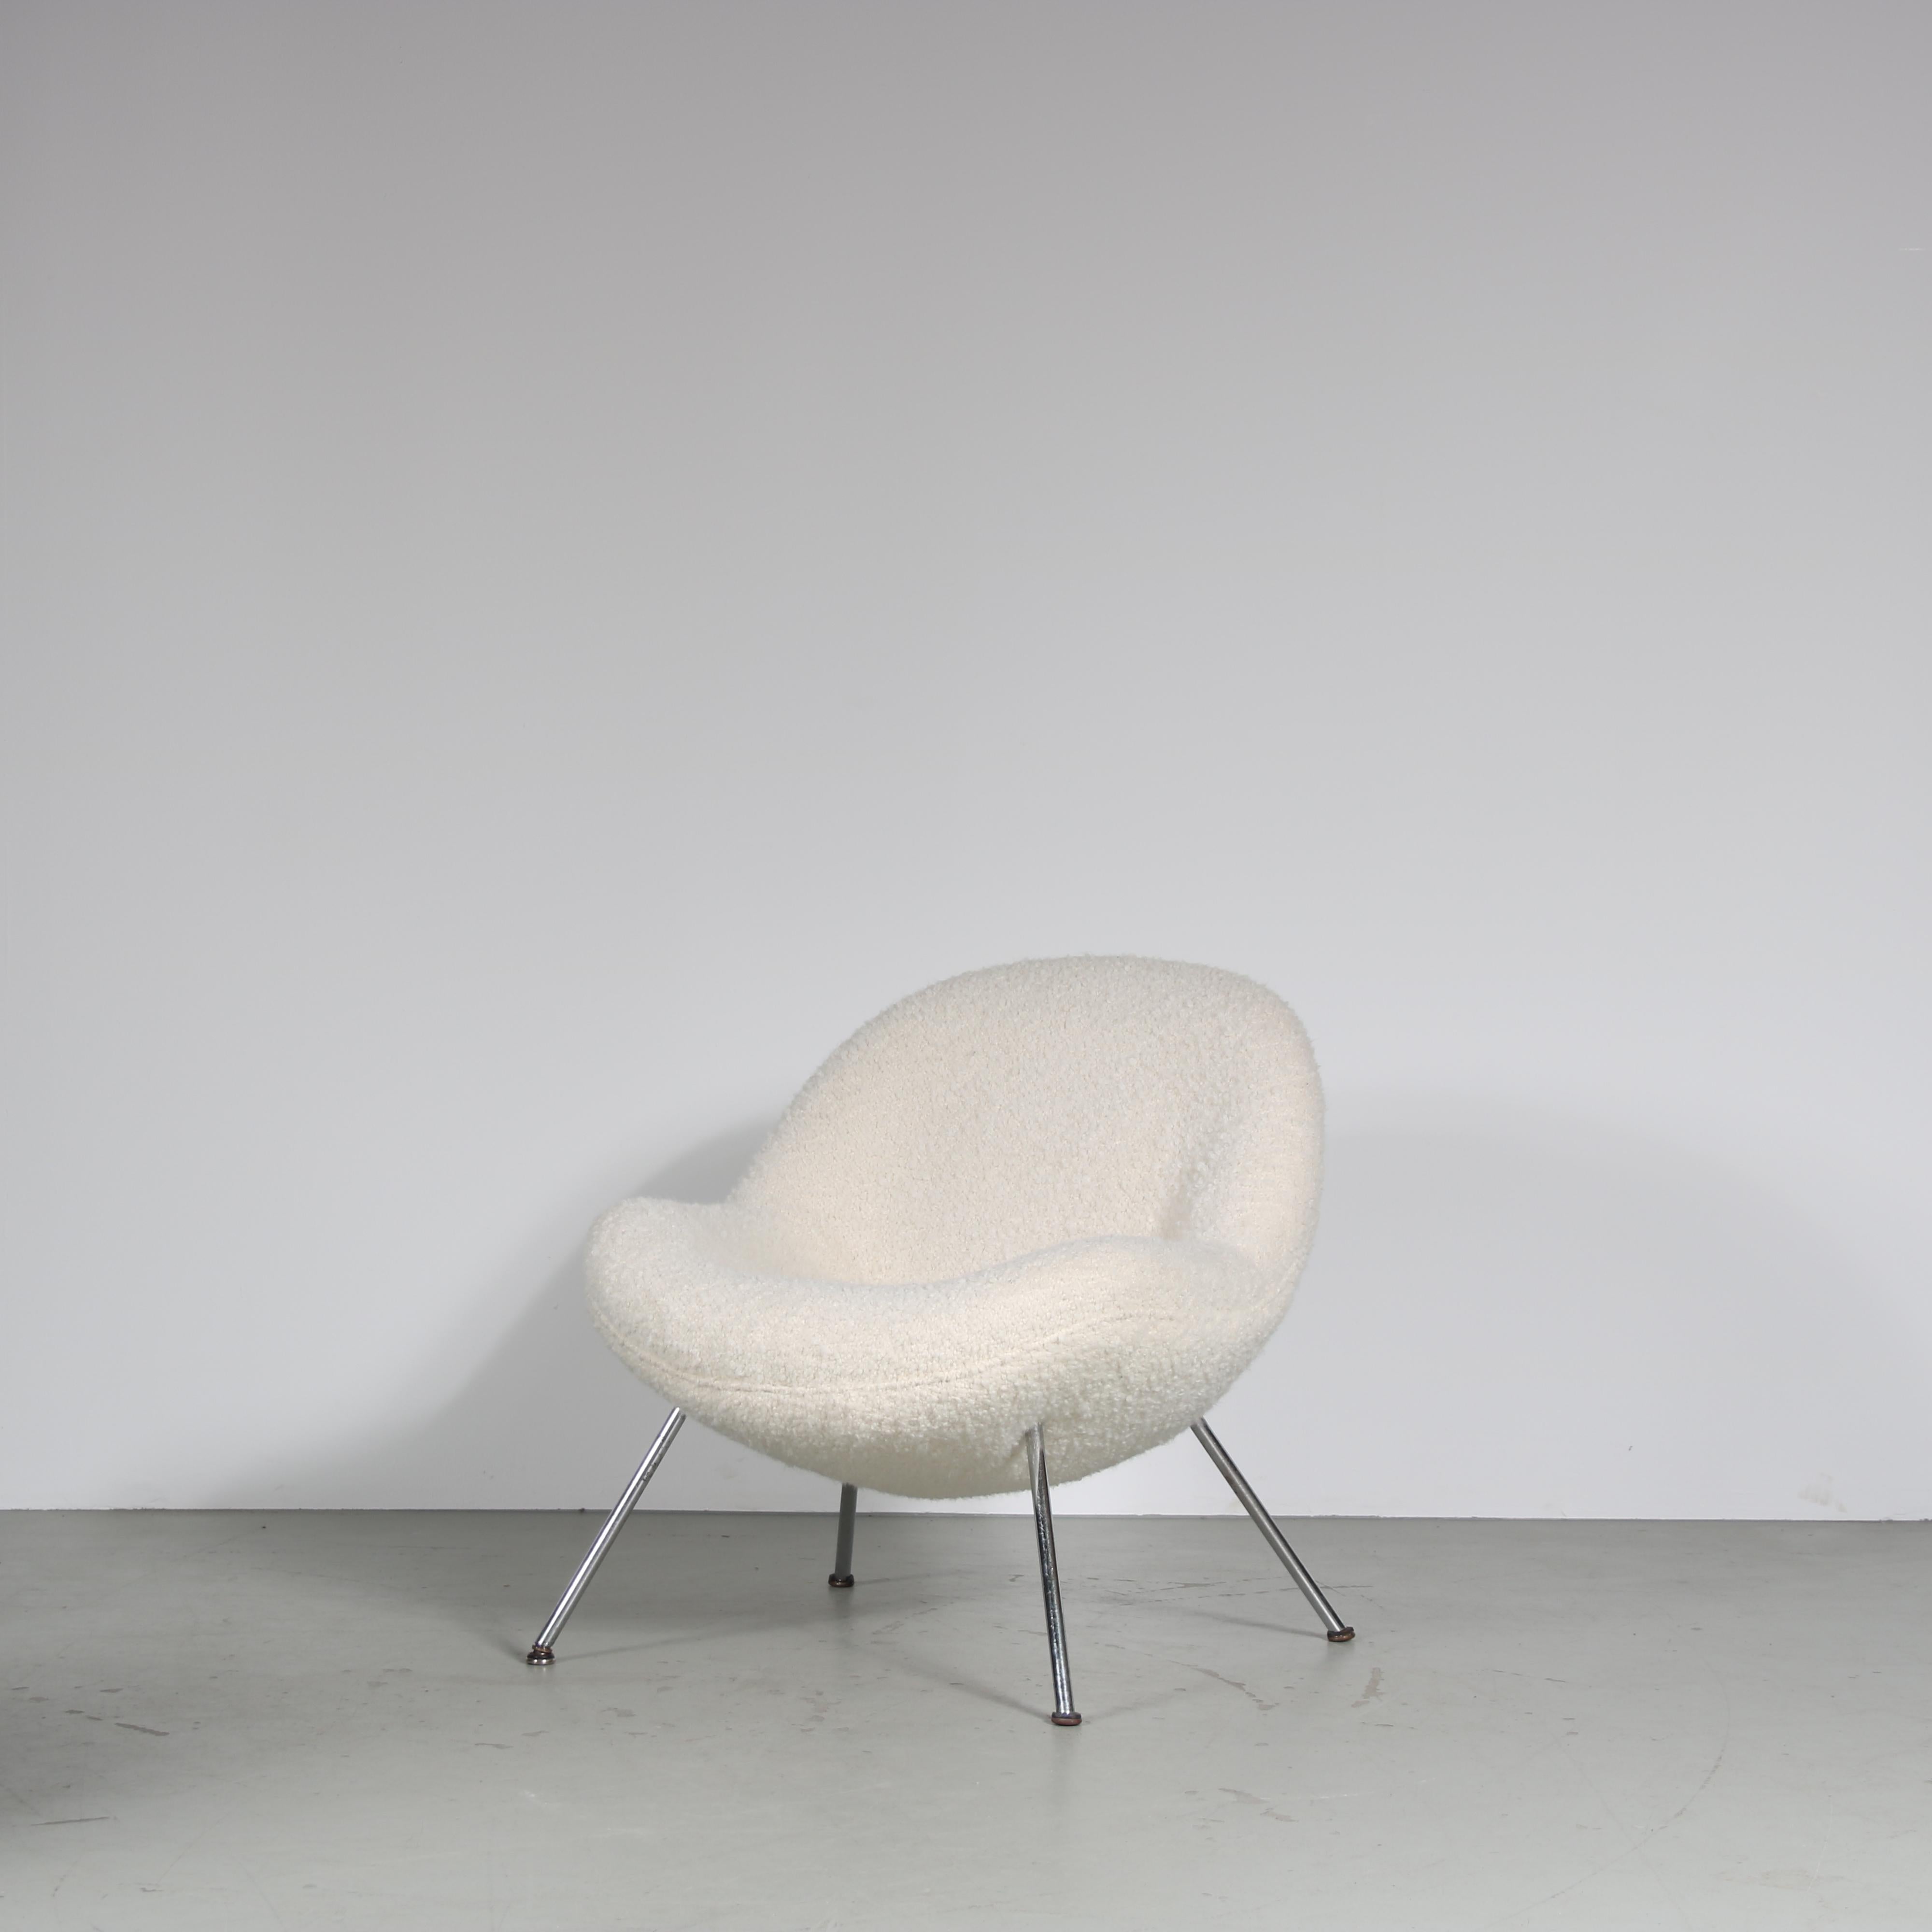 Fritz Neth “Egg” Chairs for Correcta, Germany 1950 For Sale 1